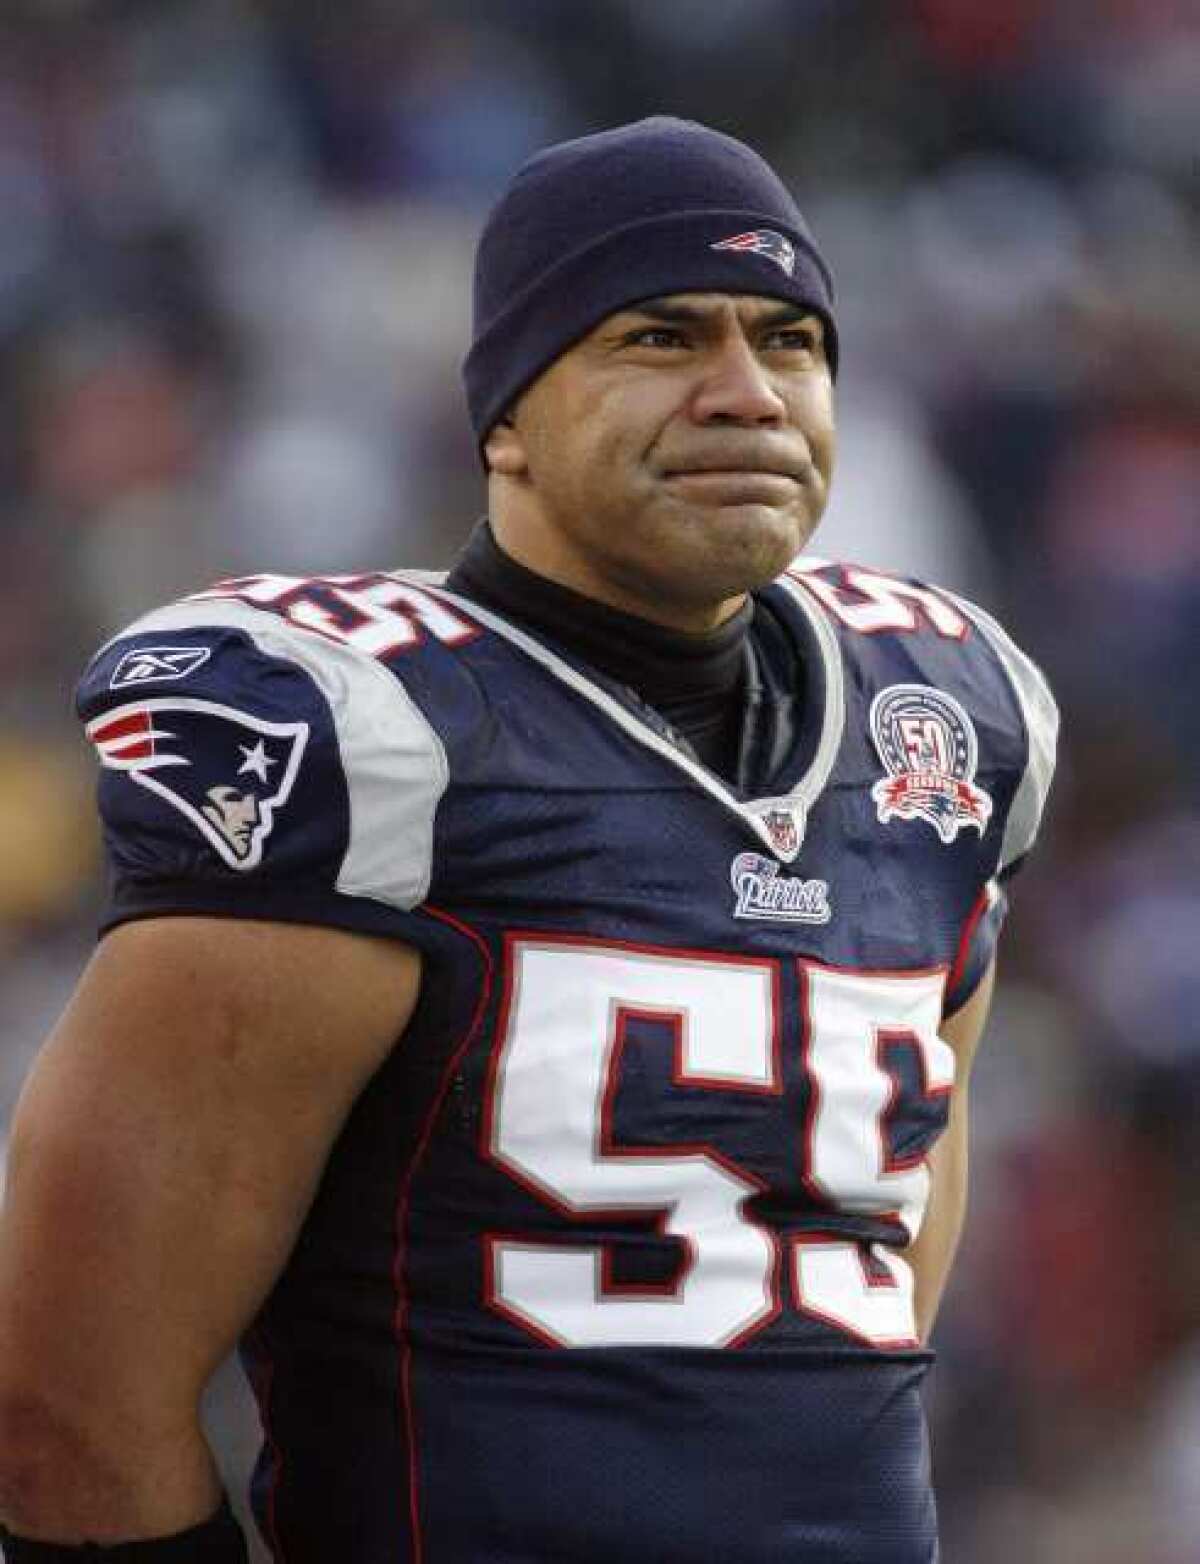 Junior Seau with the New England Patriots in 2010.